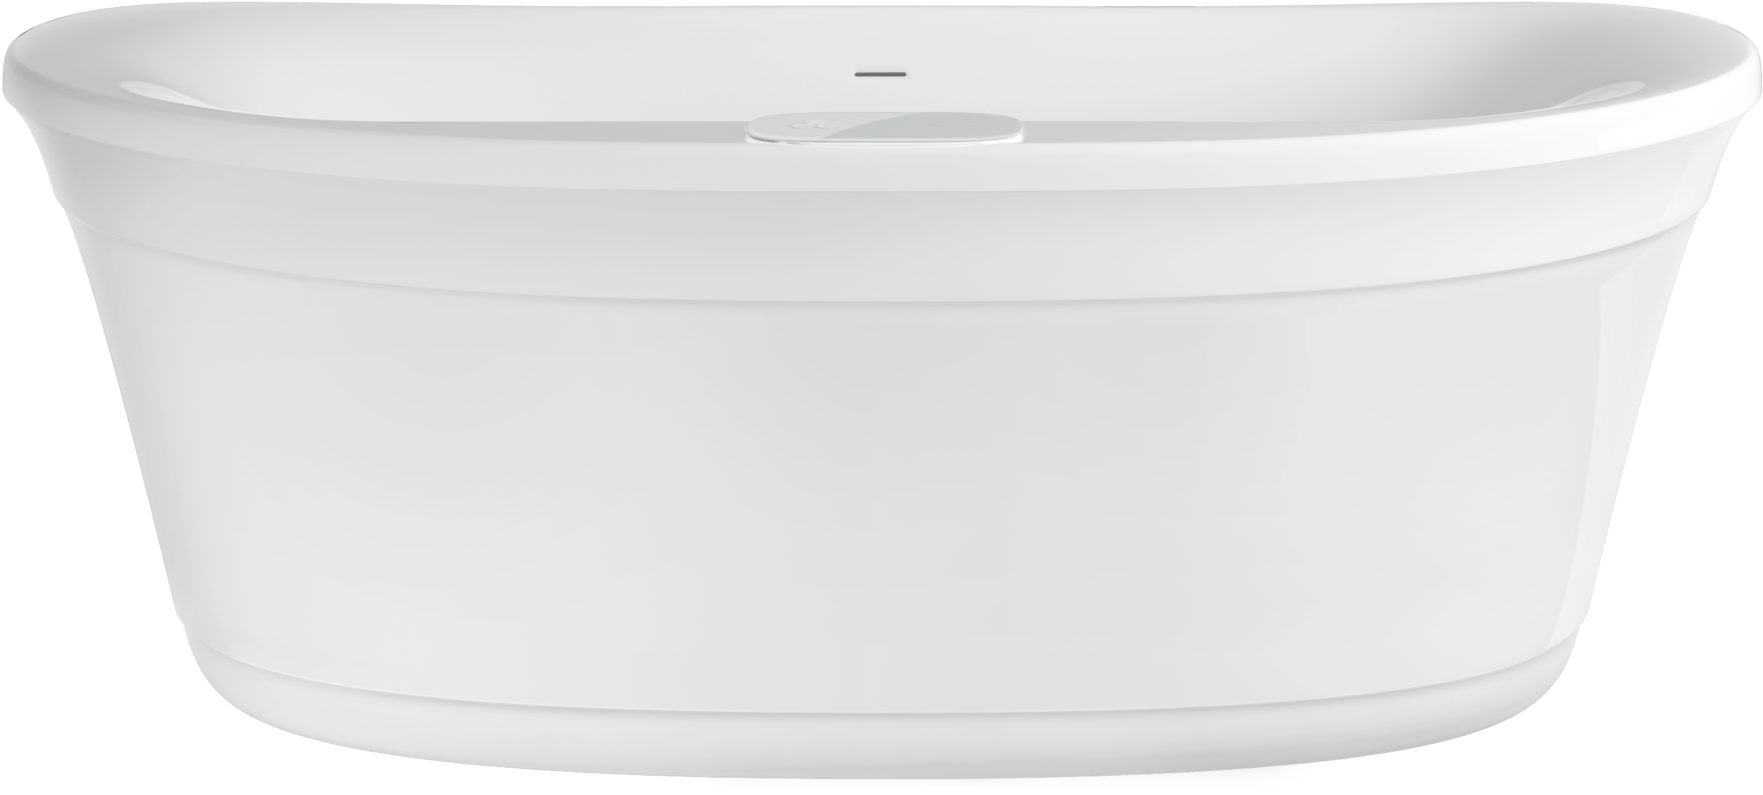 A White Rectangular Object With A Round Top